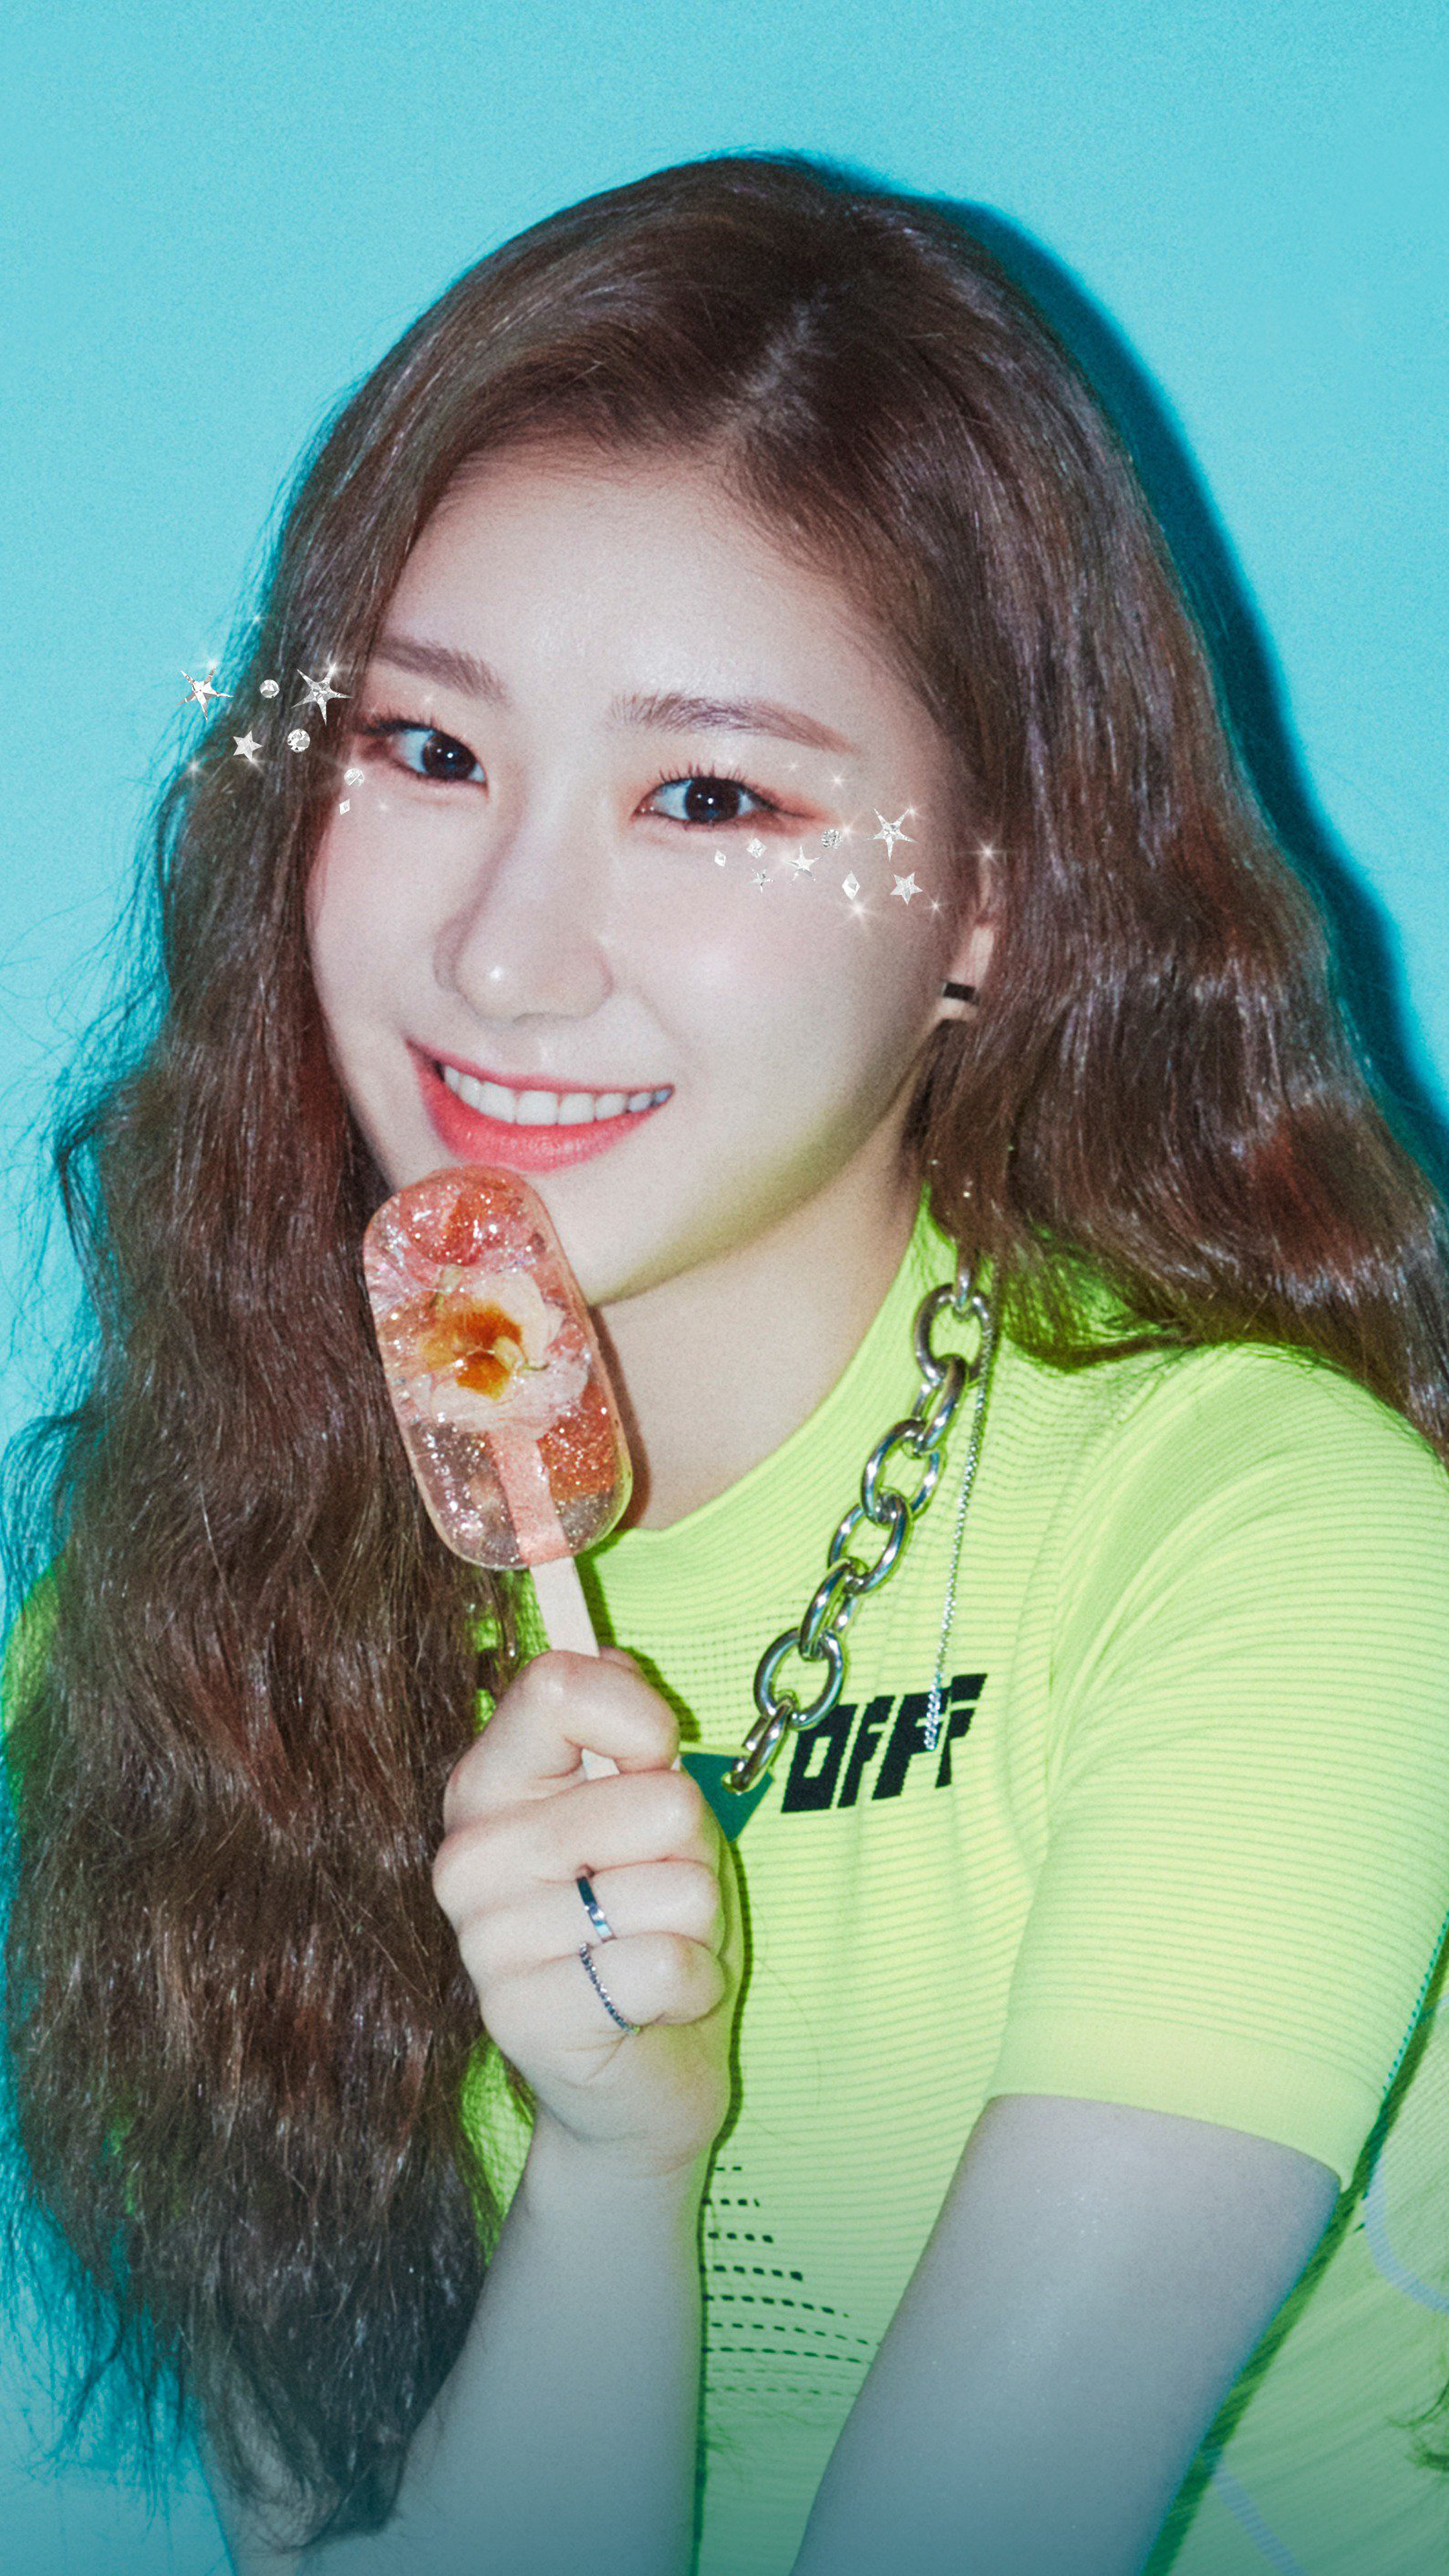 Itzy Chaeryeong Wallpapers